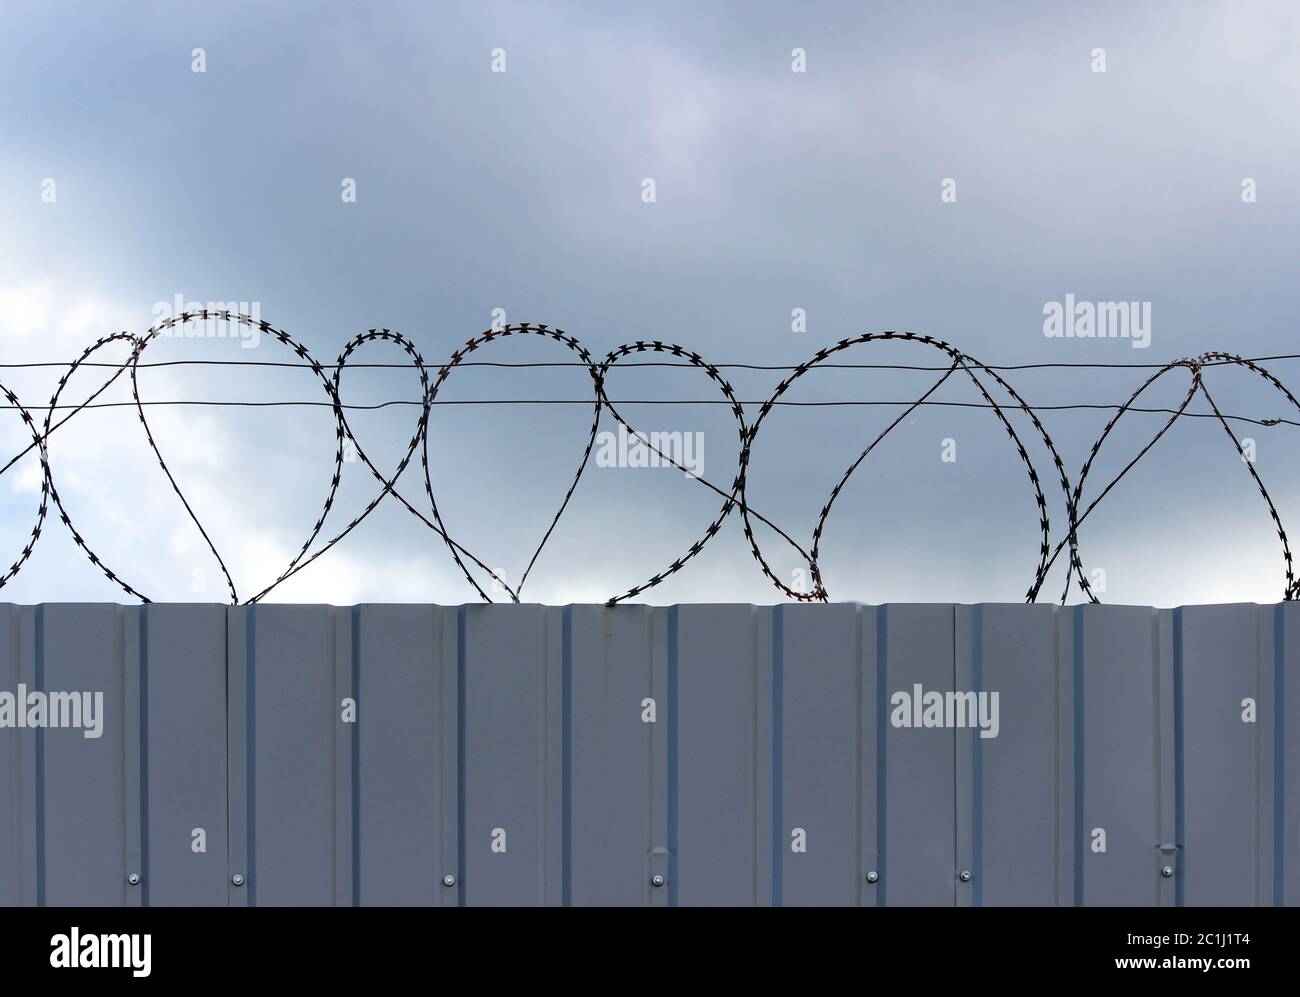 barbed wire fixed with circles on a metallic solid light gray fence. Stock Photo